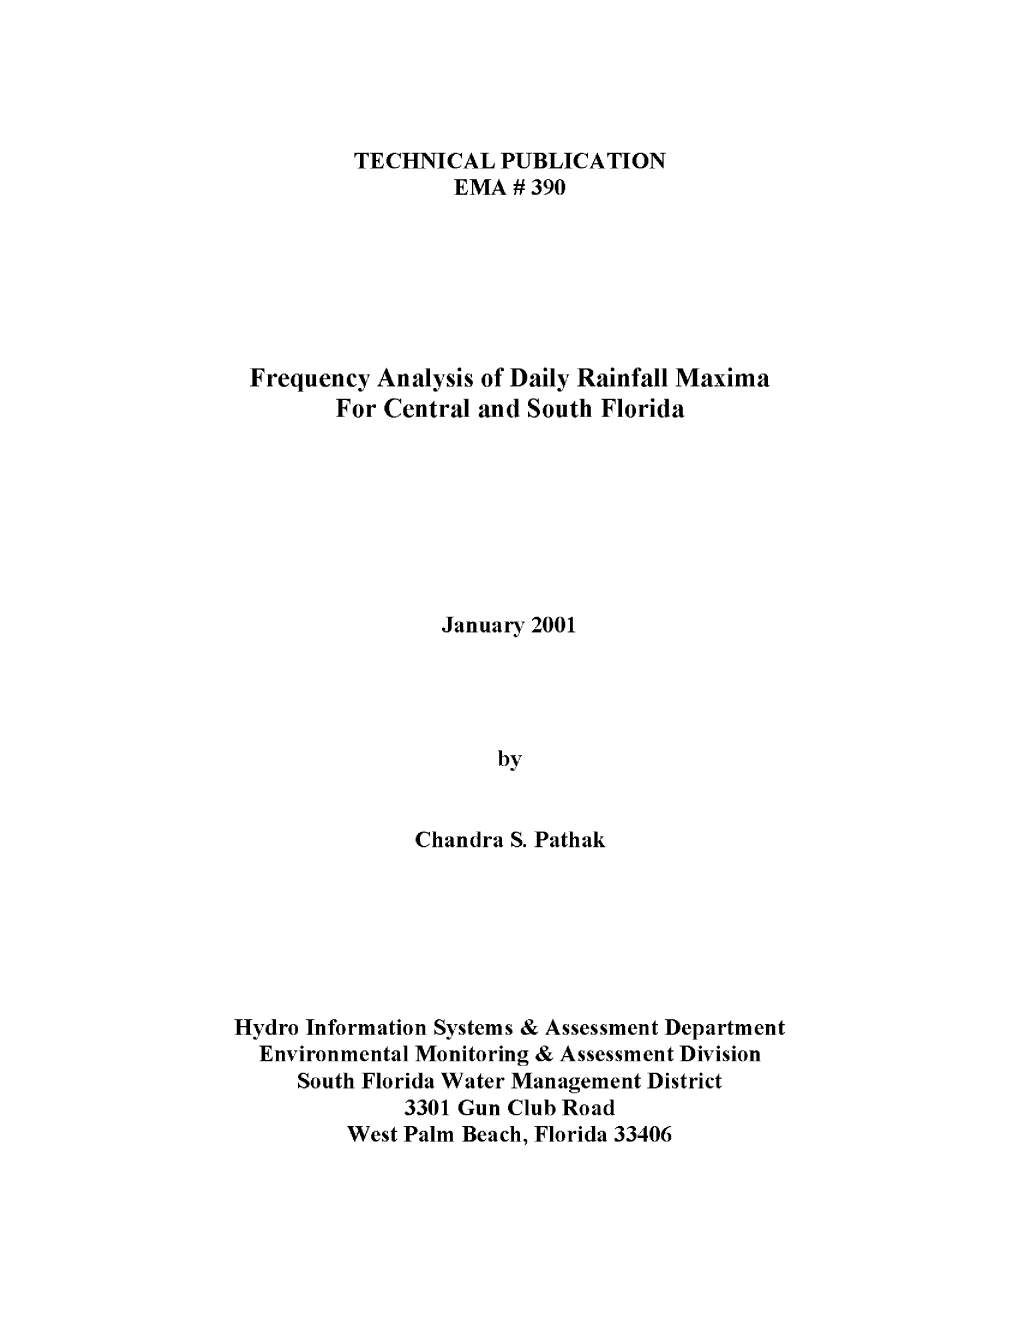 Frequency Analysis of Daily Rainfall Maxima for Central and South Florida